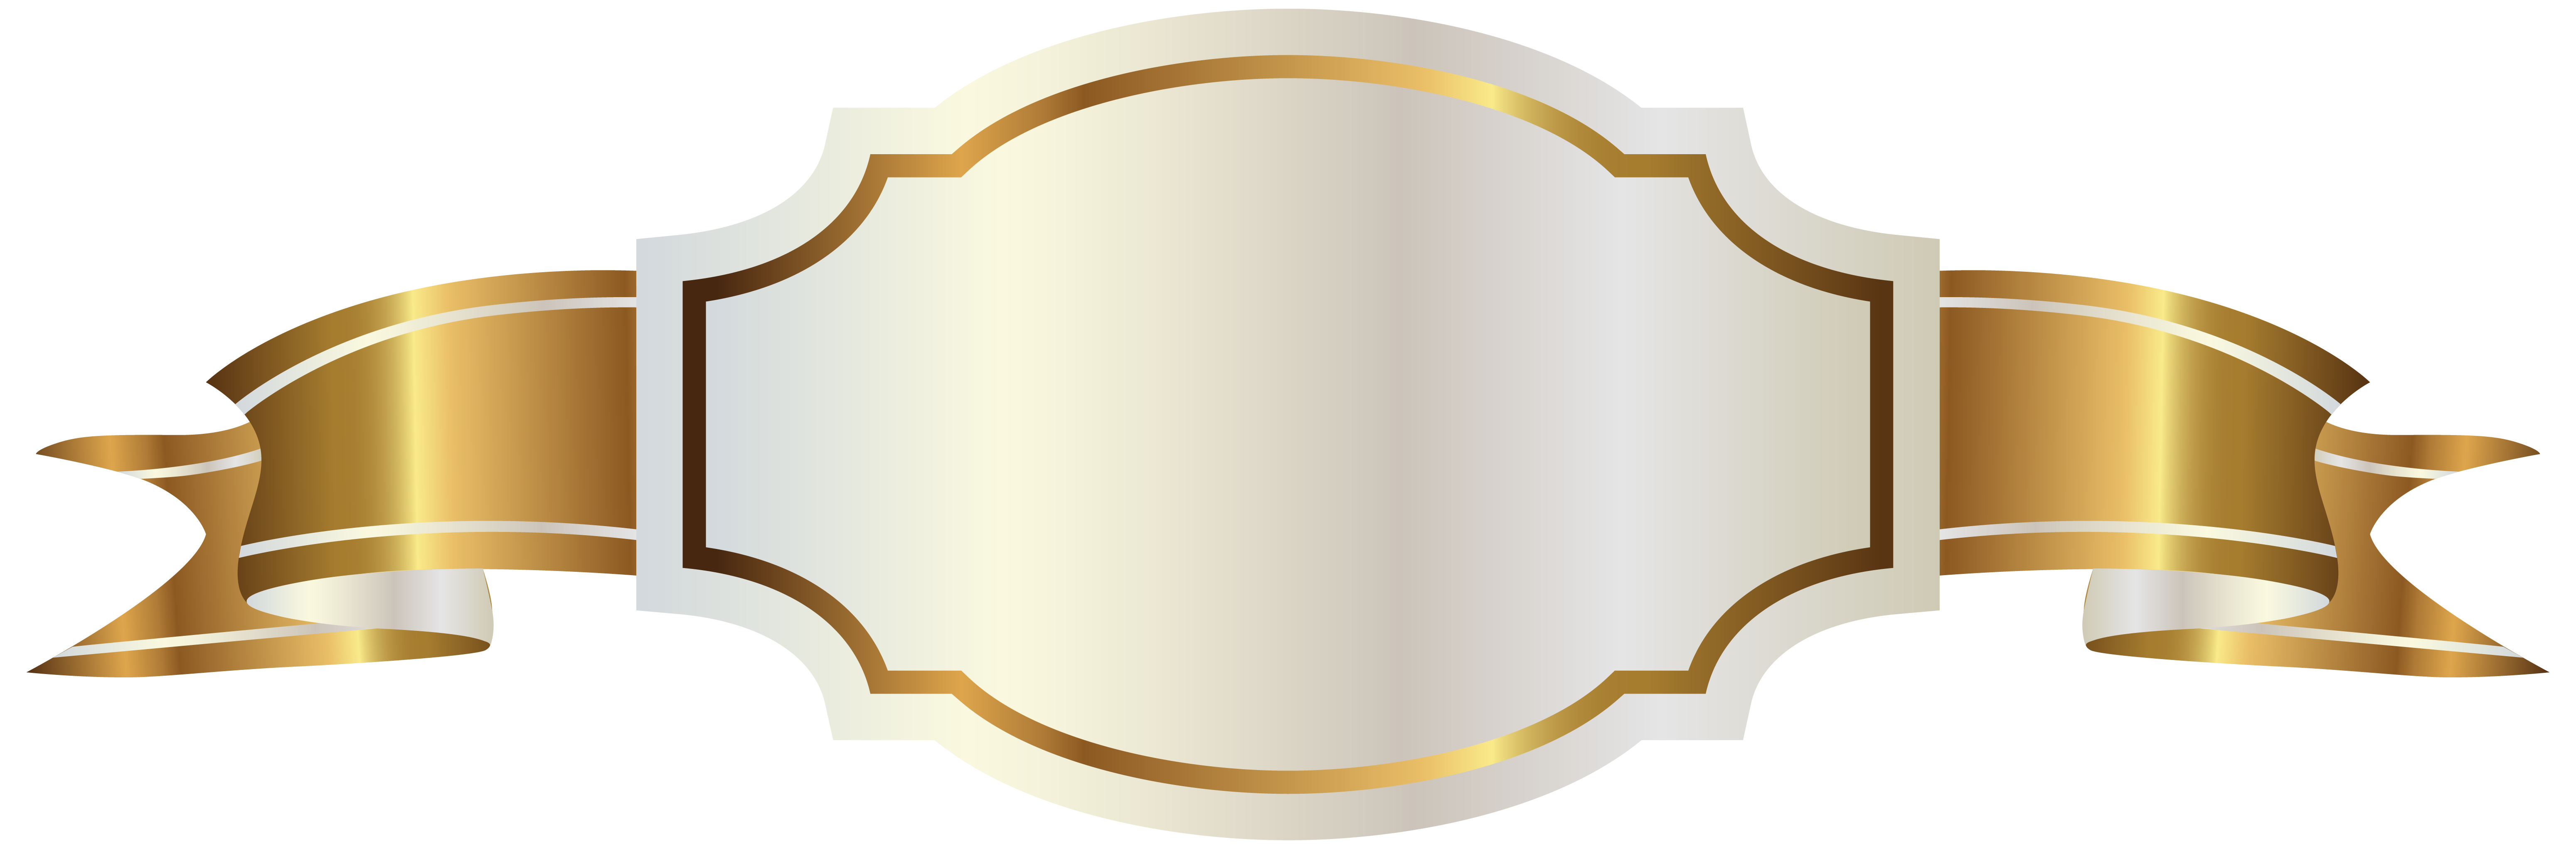 Free Gold Banner Cliparts Download Free Gold Banner Cliparts png